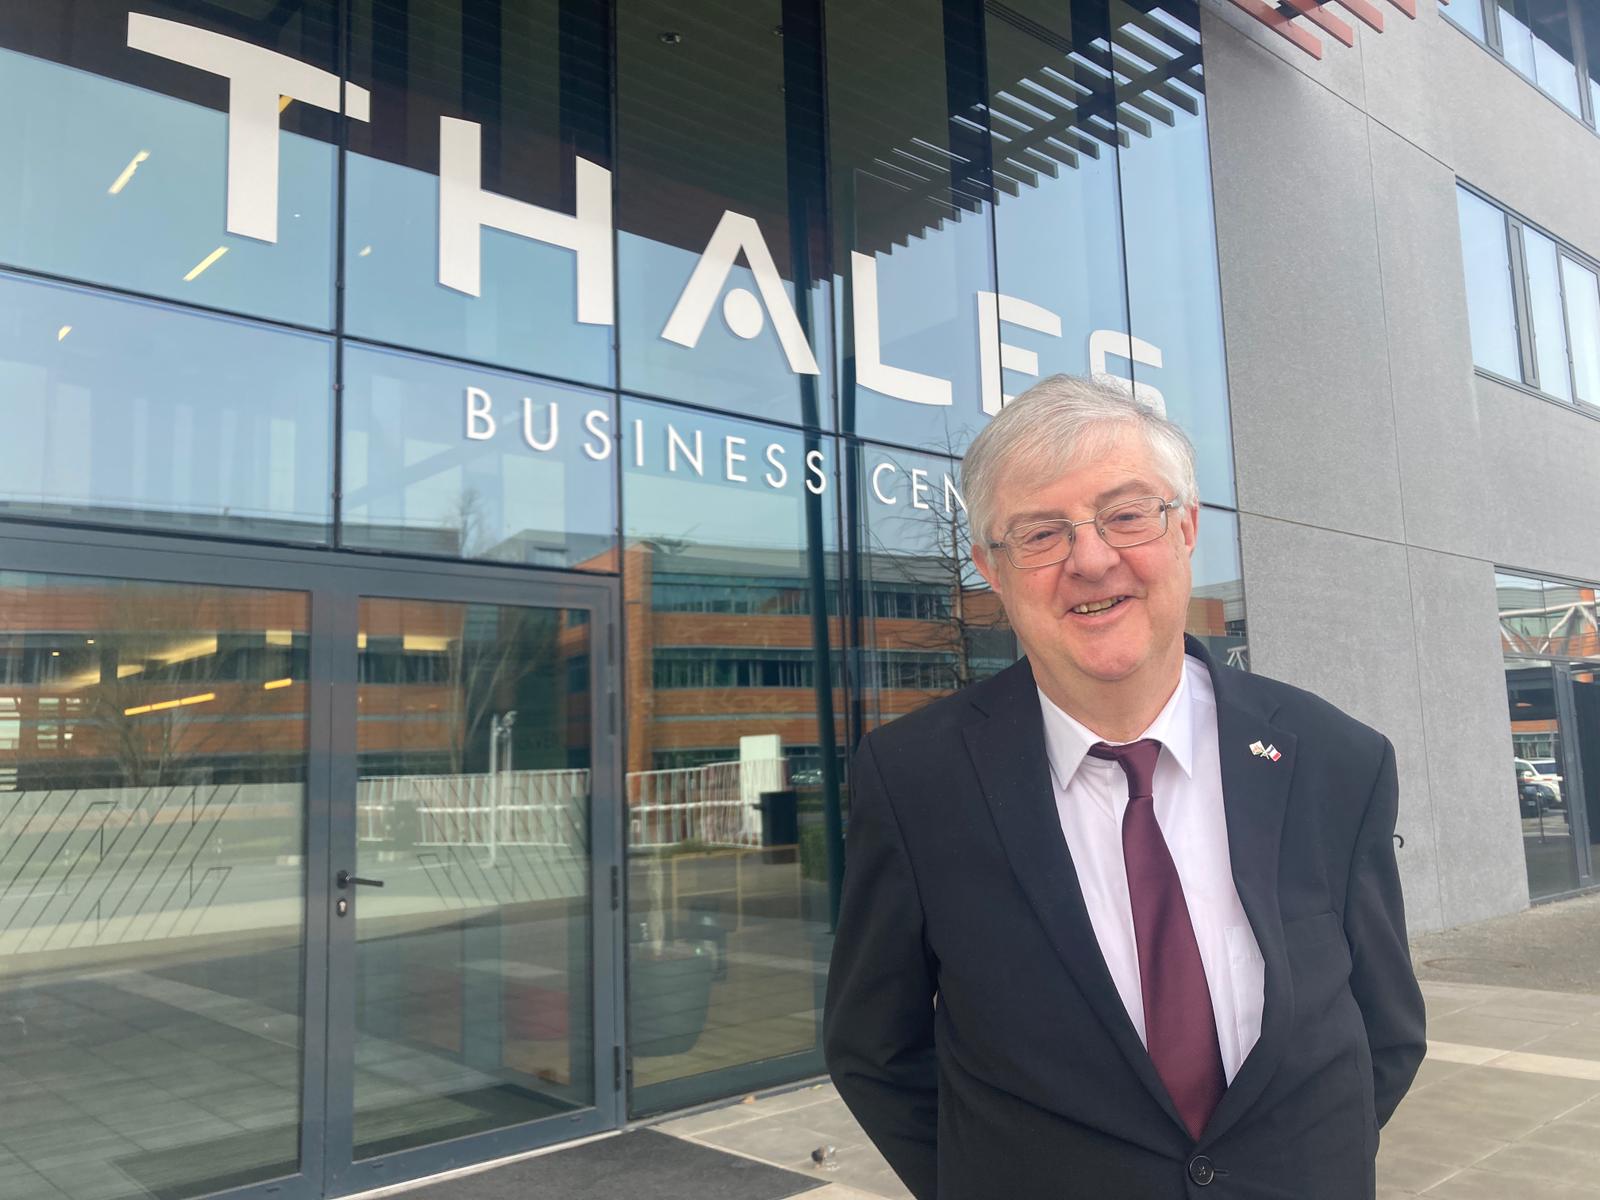 Mr Drakeford at Thales Business Centre in Paris to discuss cyber security. Mr Drakeford on a three-day trip to France meeting with energy and industrial companies investing in Wales.